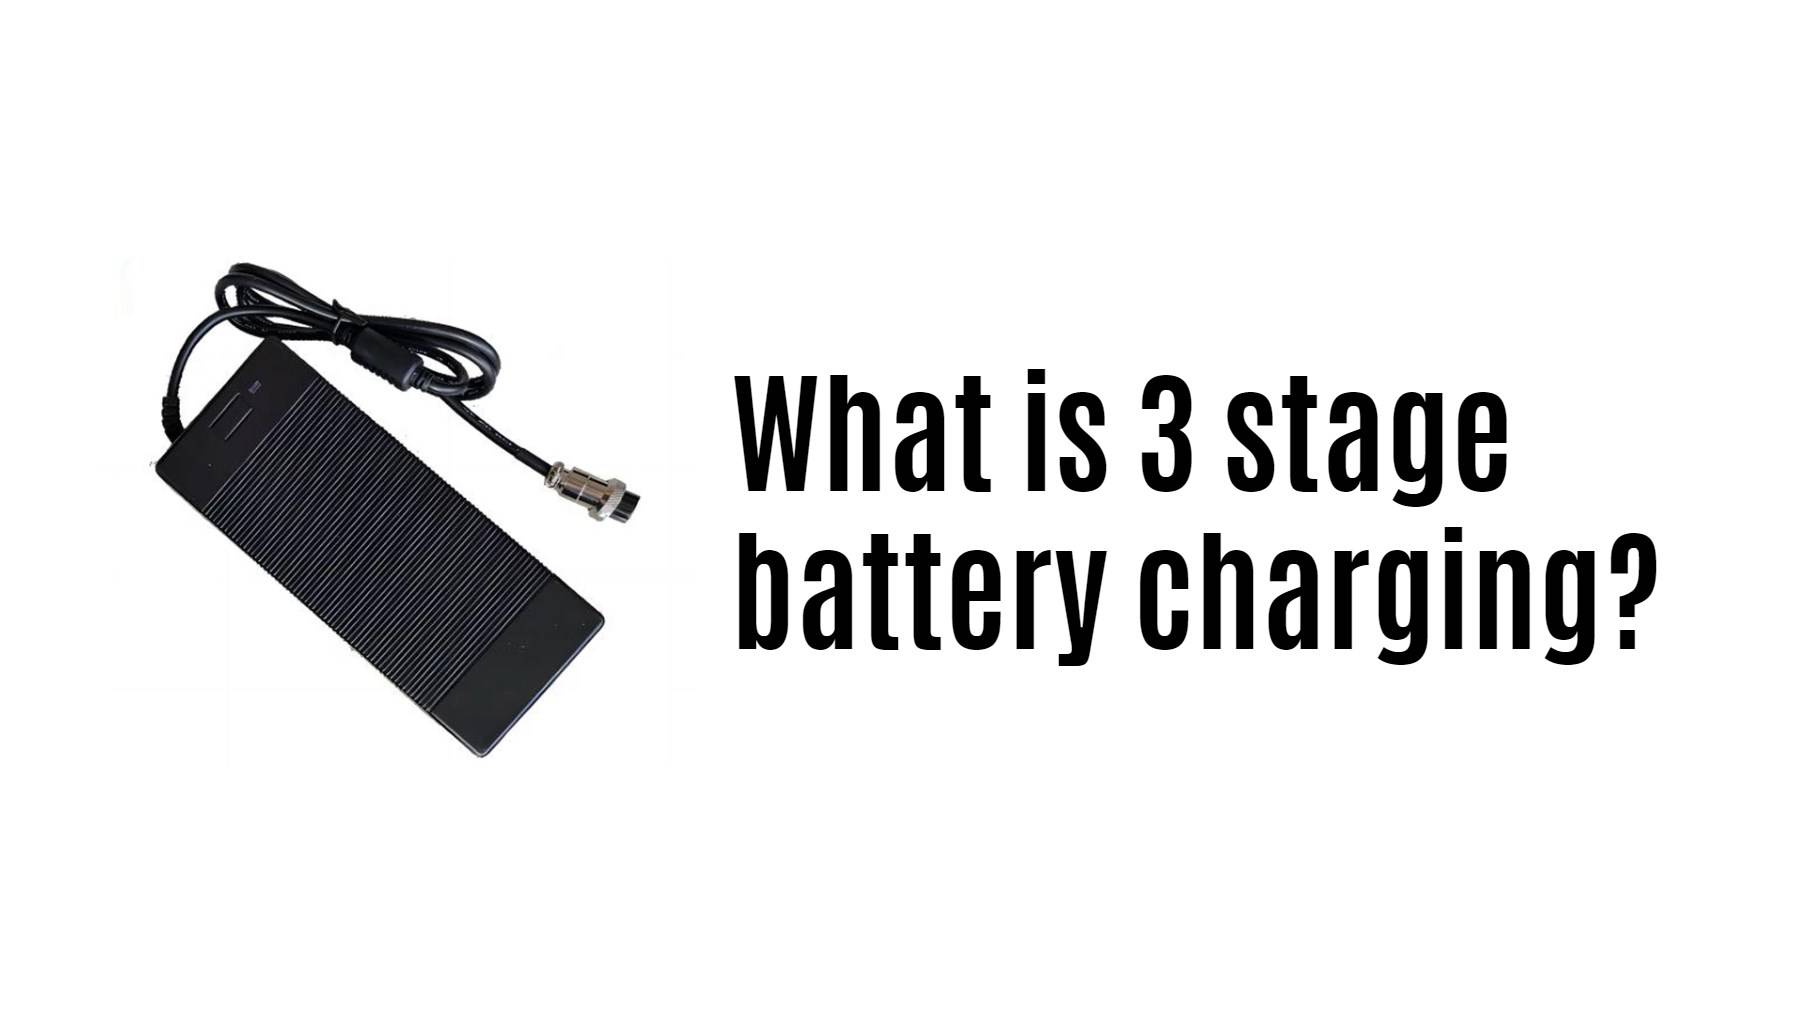 What is 3 stage battery charging?